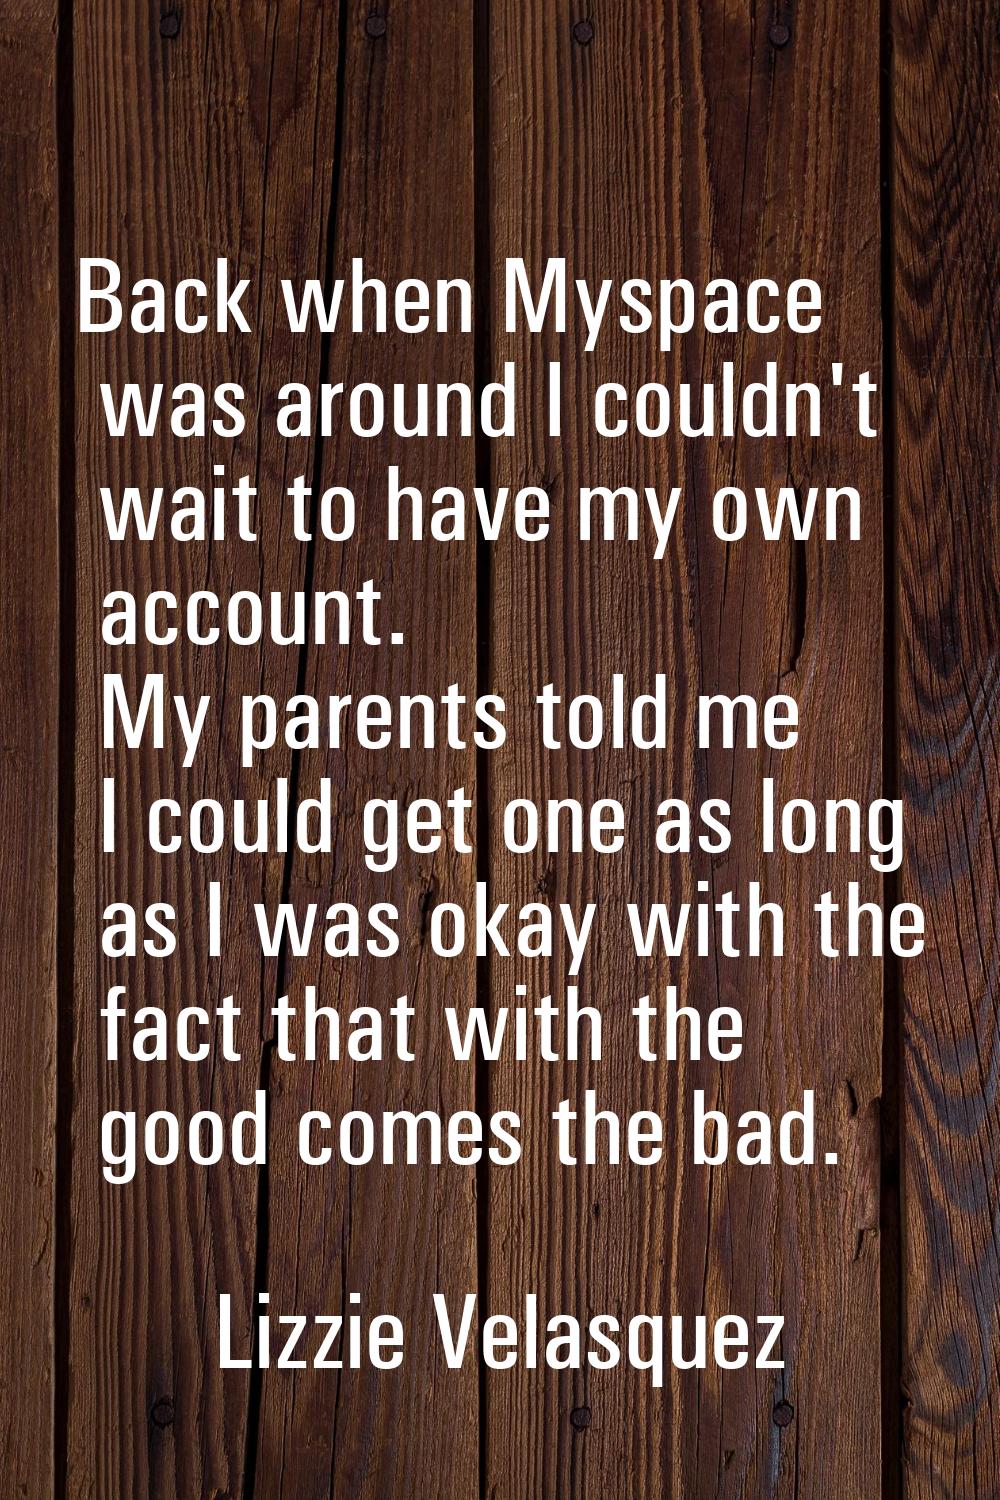 Back when Myspace was around I couldn't wait to have my own account. My parents told me I could get